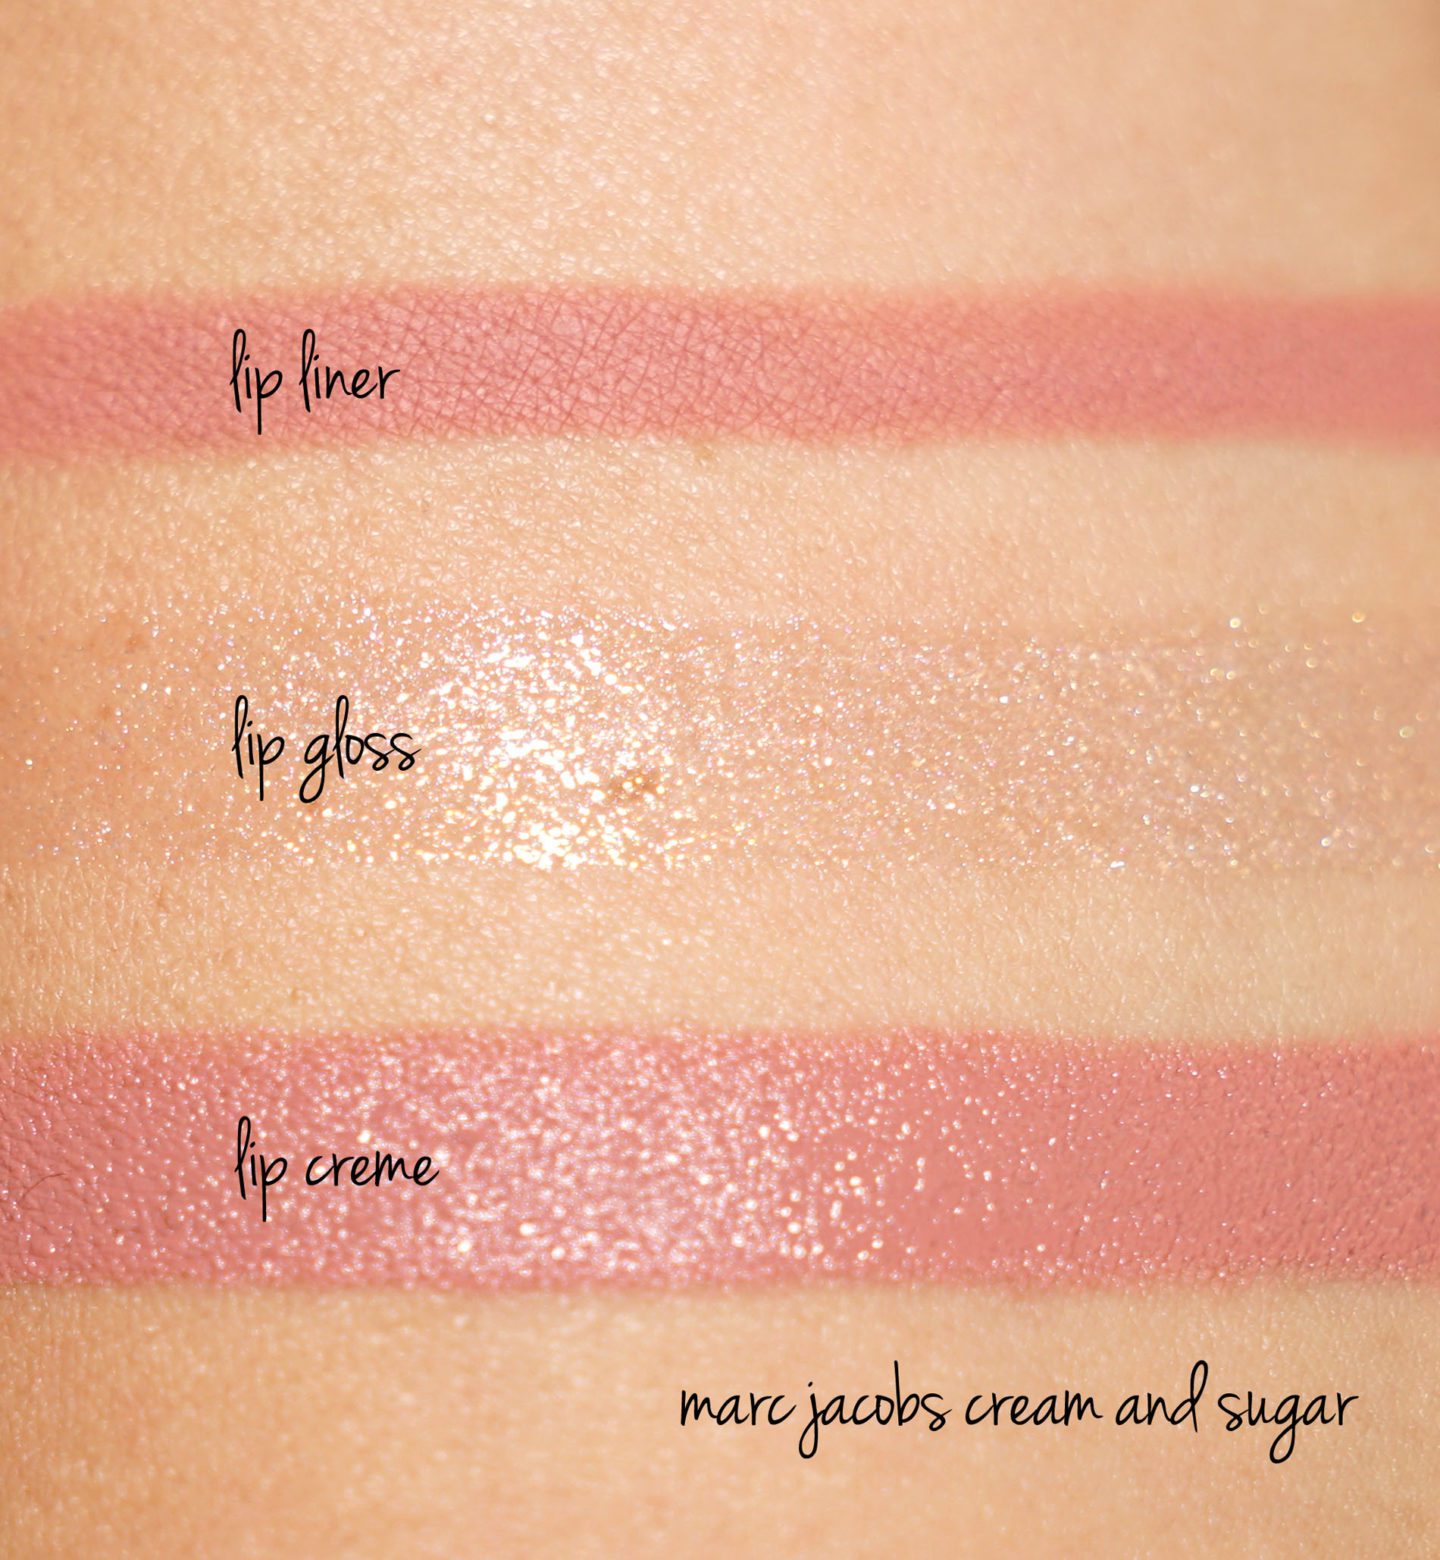 Marc Jacobs Cream and Sugar Trio swatches | The Beauty Look Book